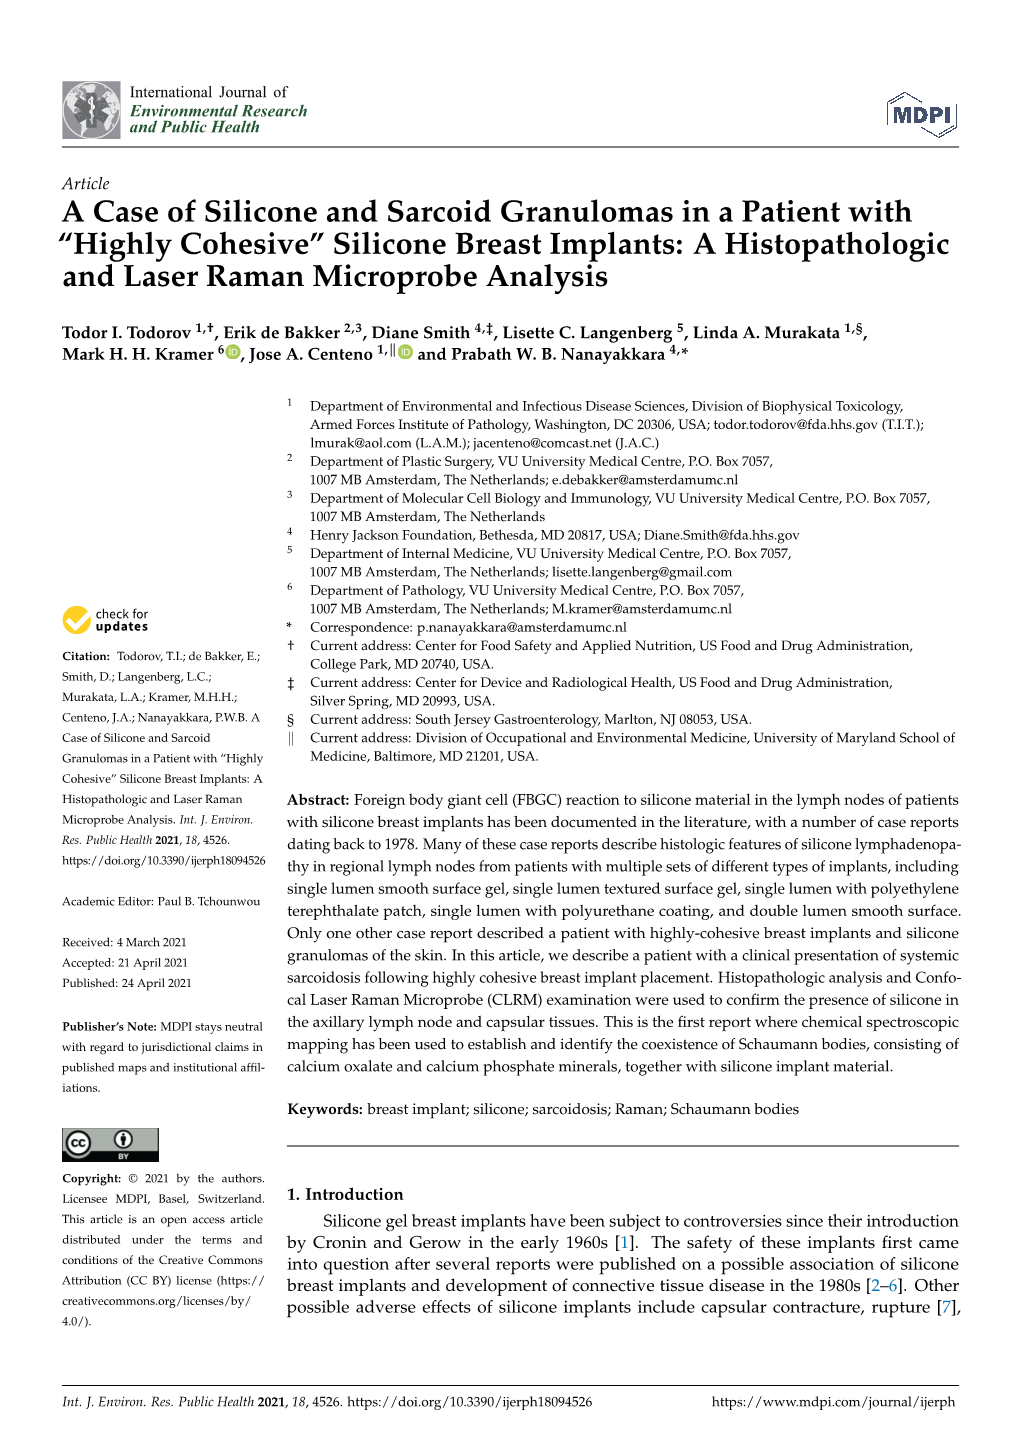 “Highly Cohesive” Silicone Breast Implants: a Histopathologic and Laser Raman Microprobe Analysis